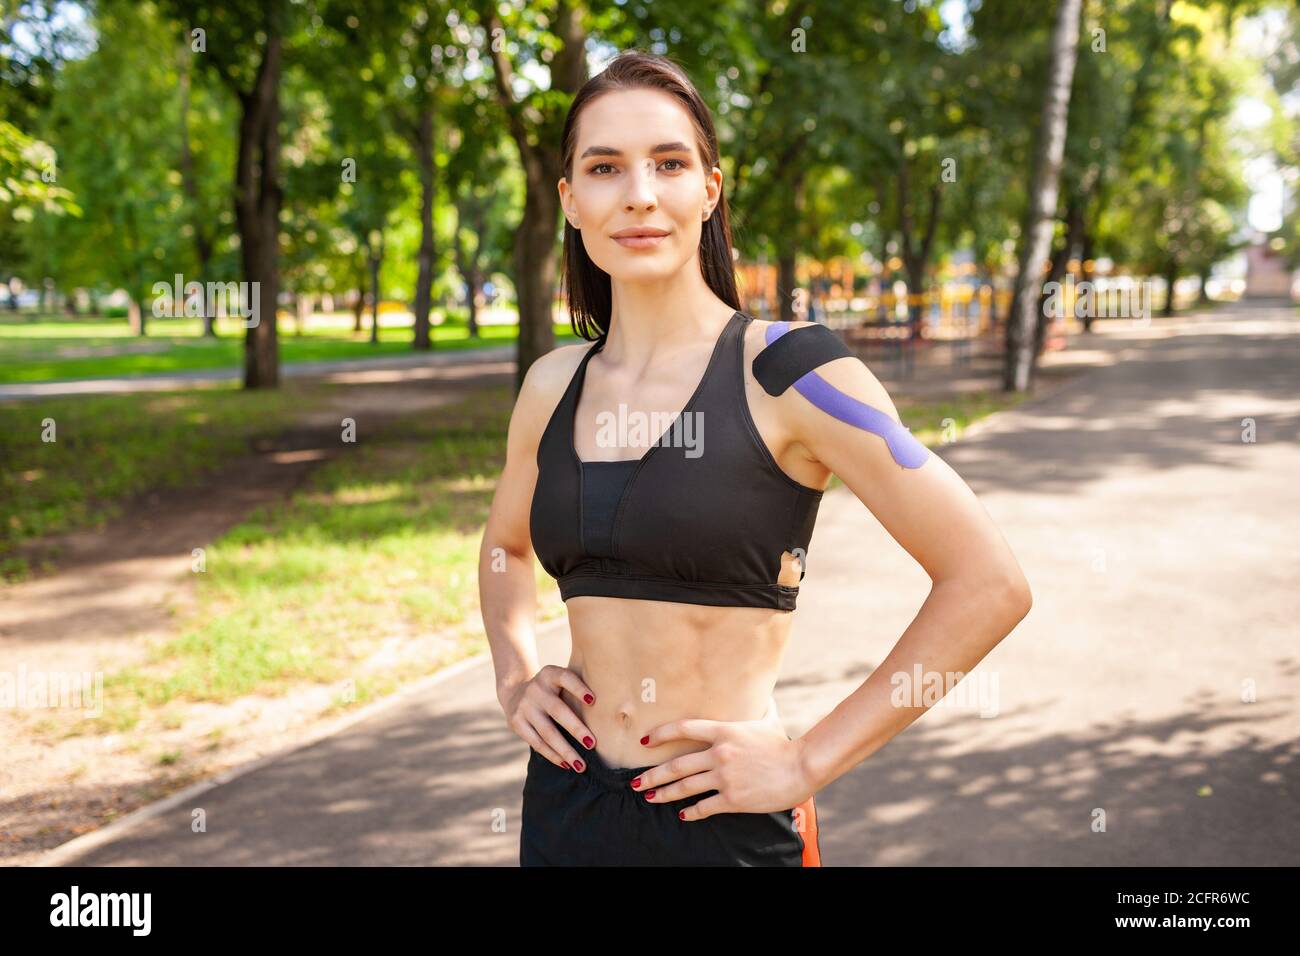 Sporty woman with perfect athletic body posing on sportsground Stock Photo  - Alamy